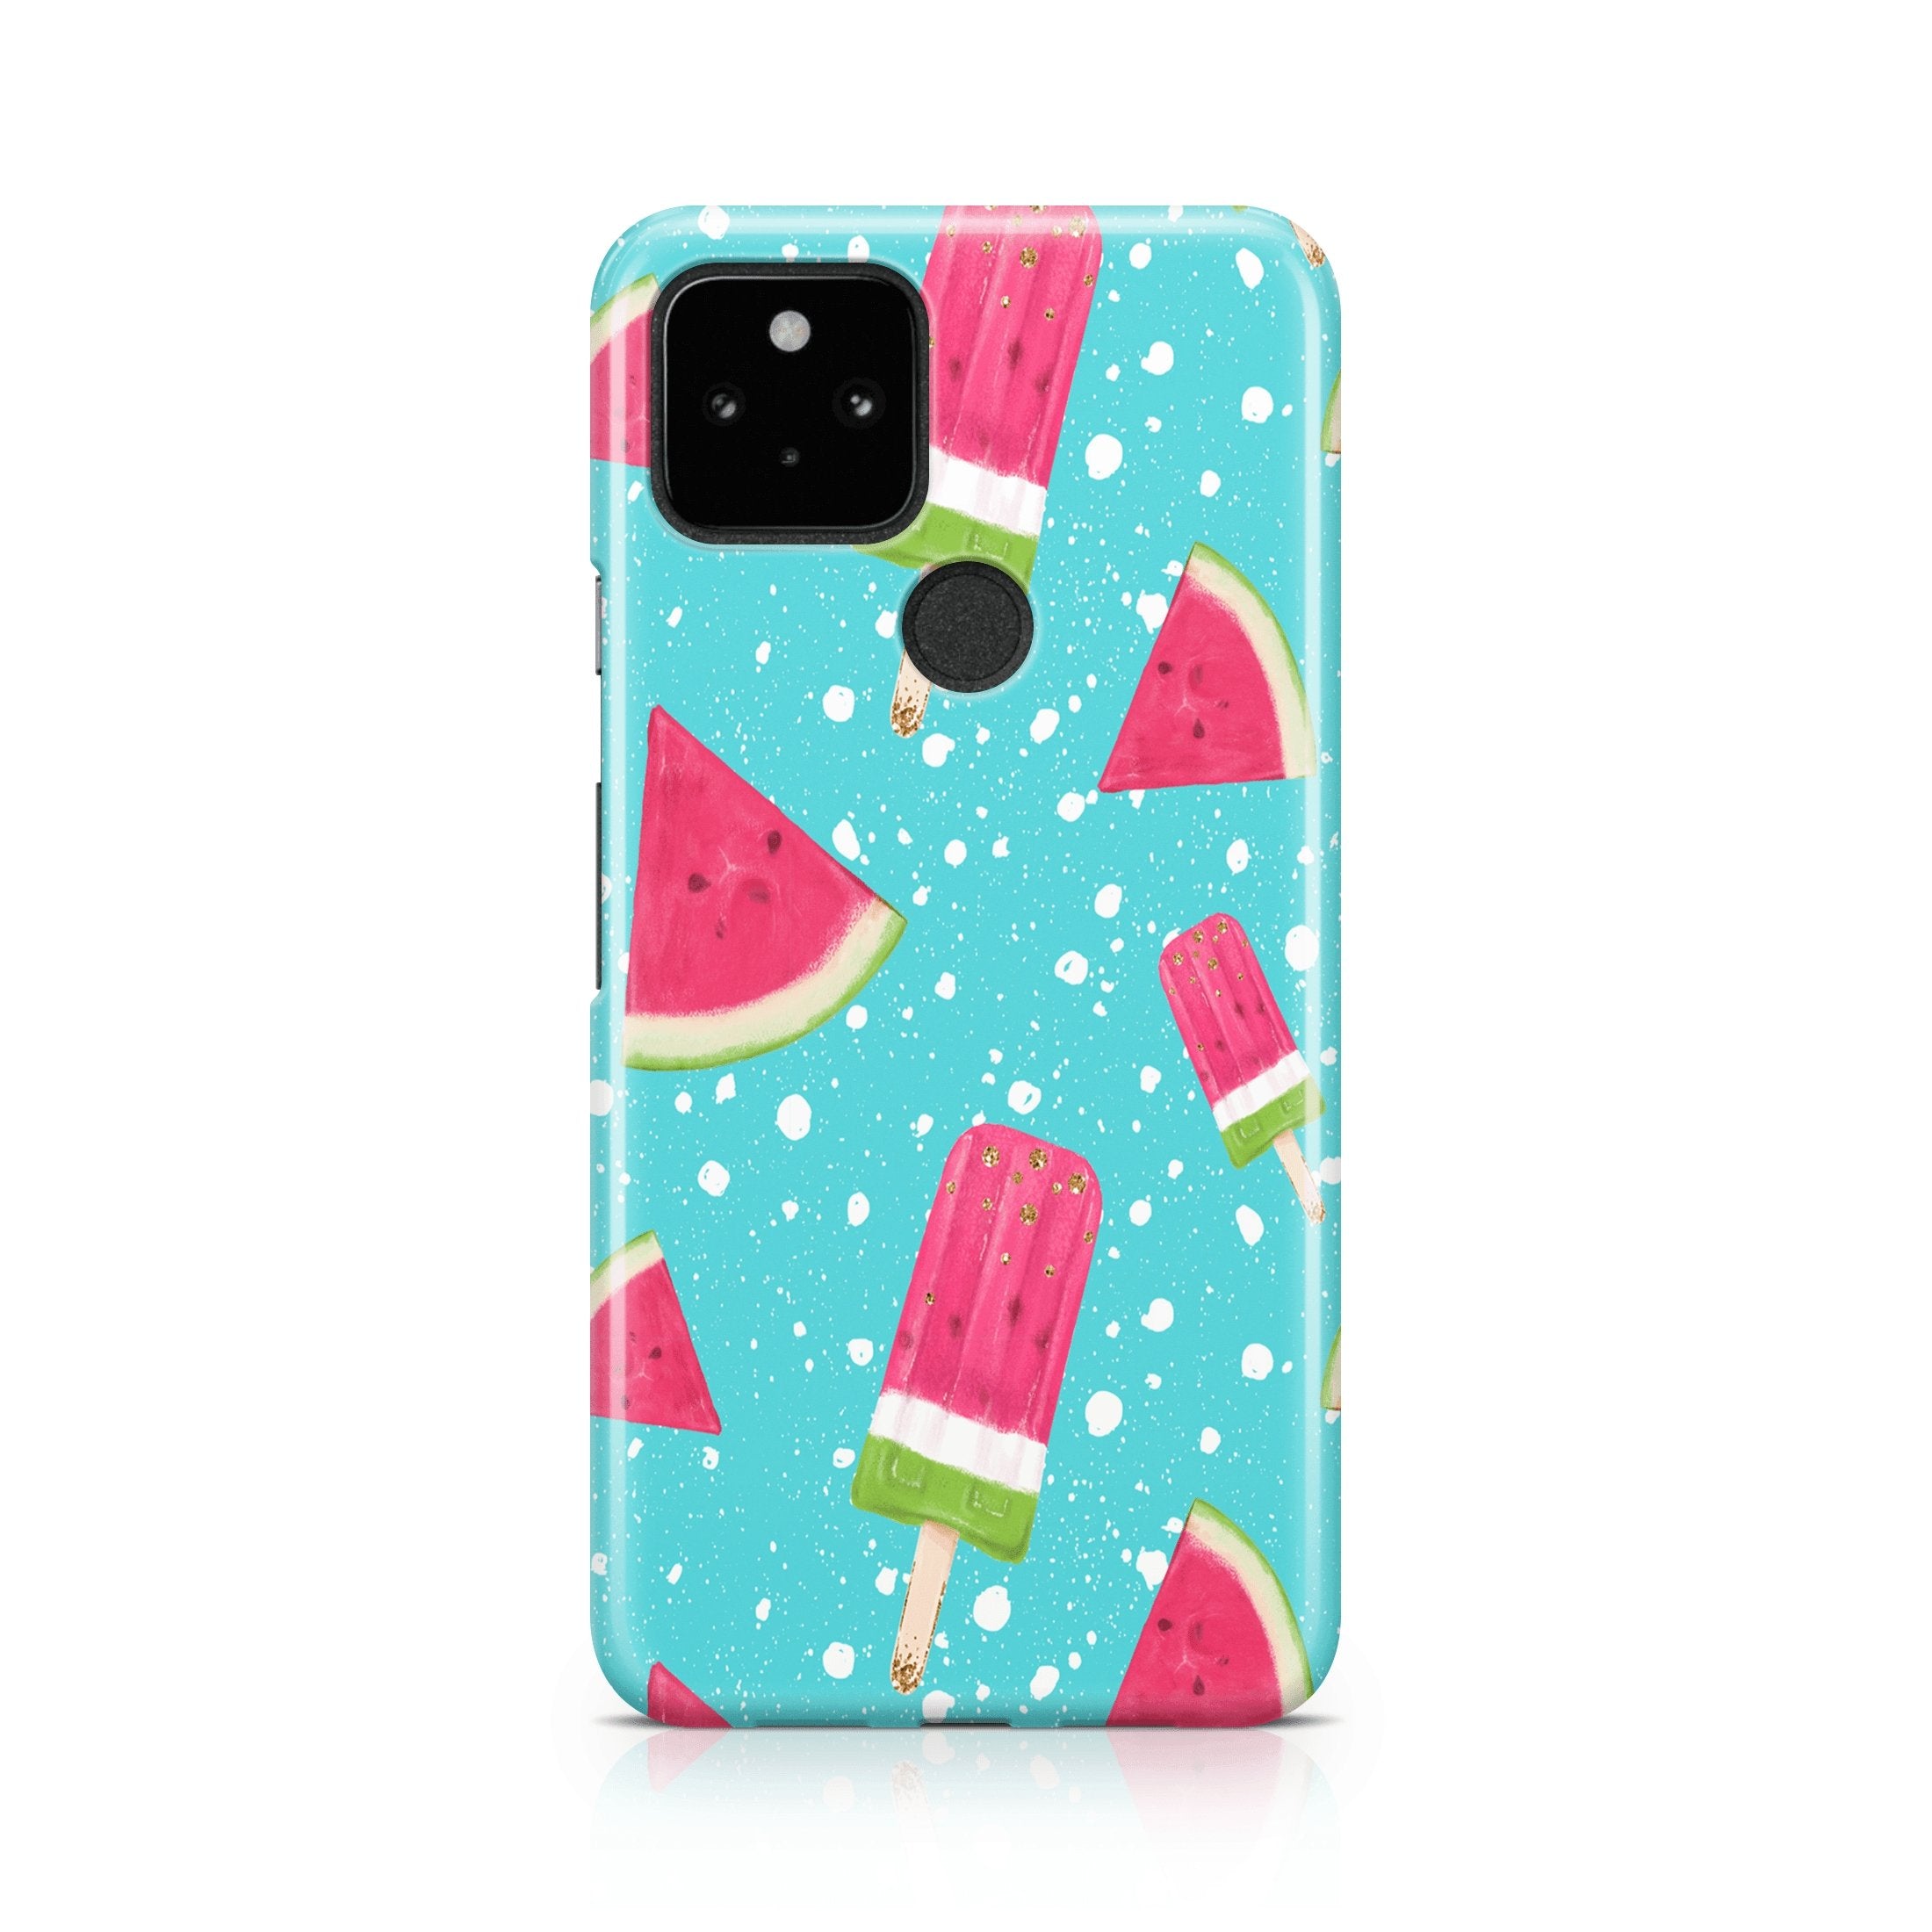 Watermelon Popsicle - Google phone case designs by CaseSwagger